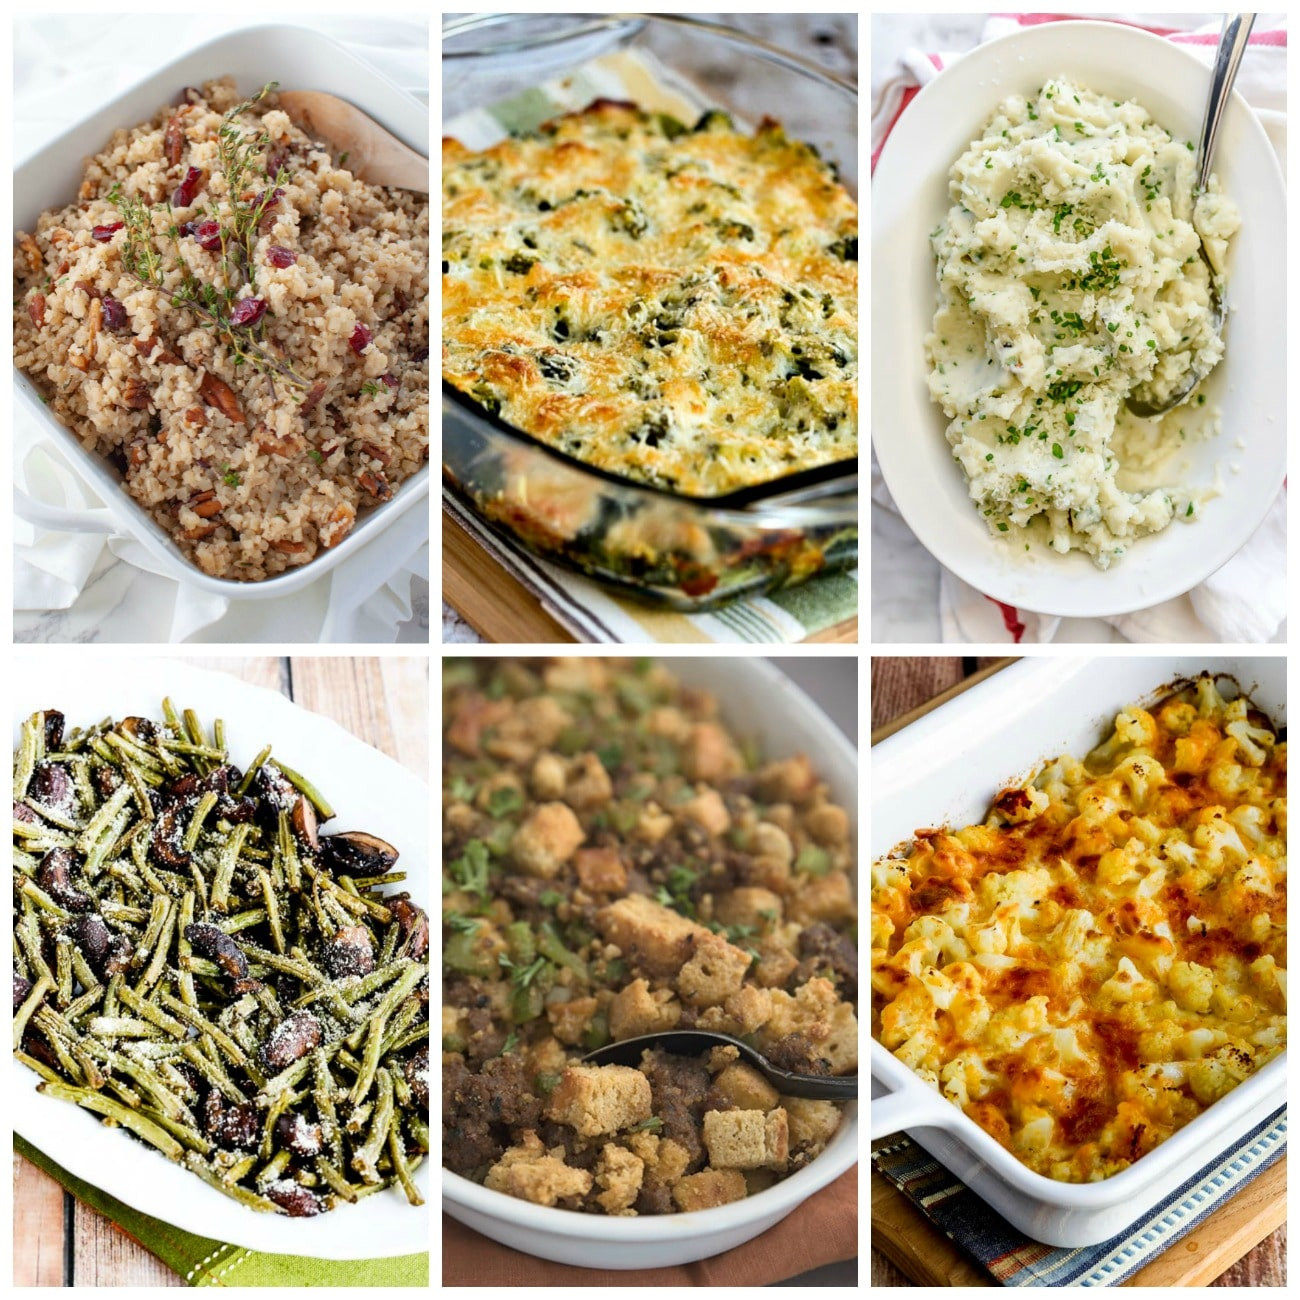 The Kitchen Thanksgiving Recipes
 The BEST Low Carb and Gluten Free Thanksgiving Side Dish